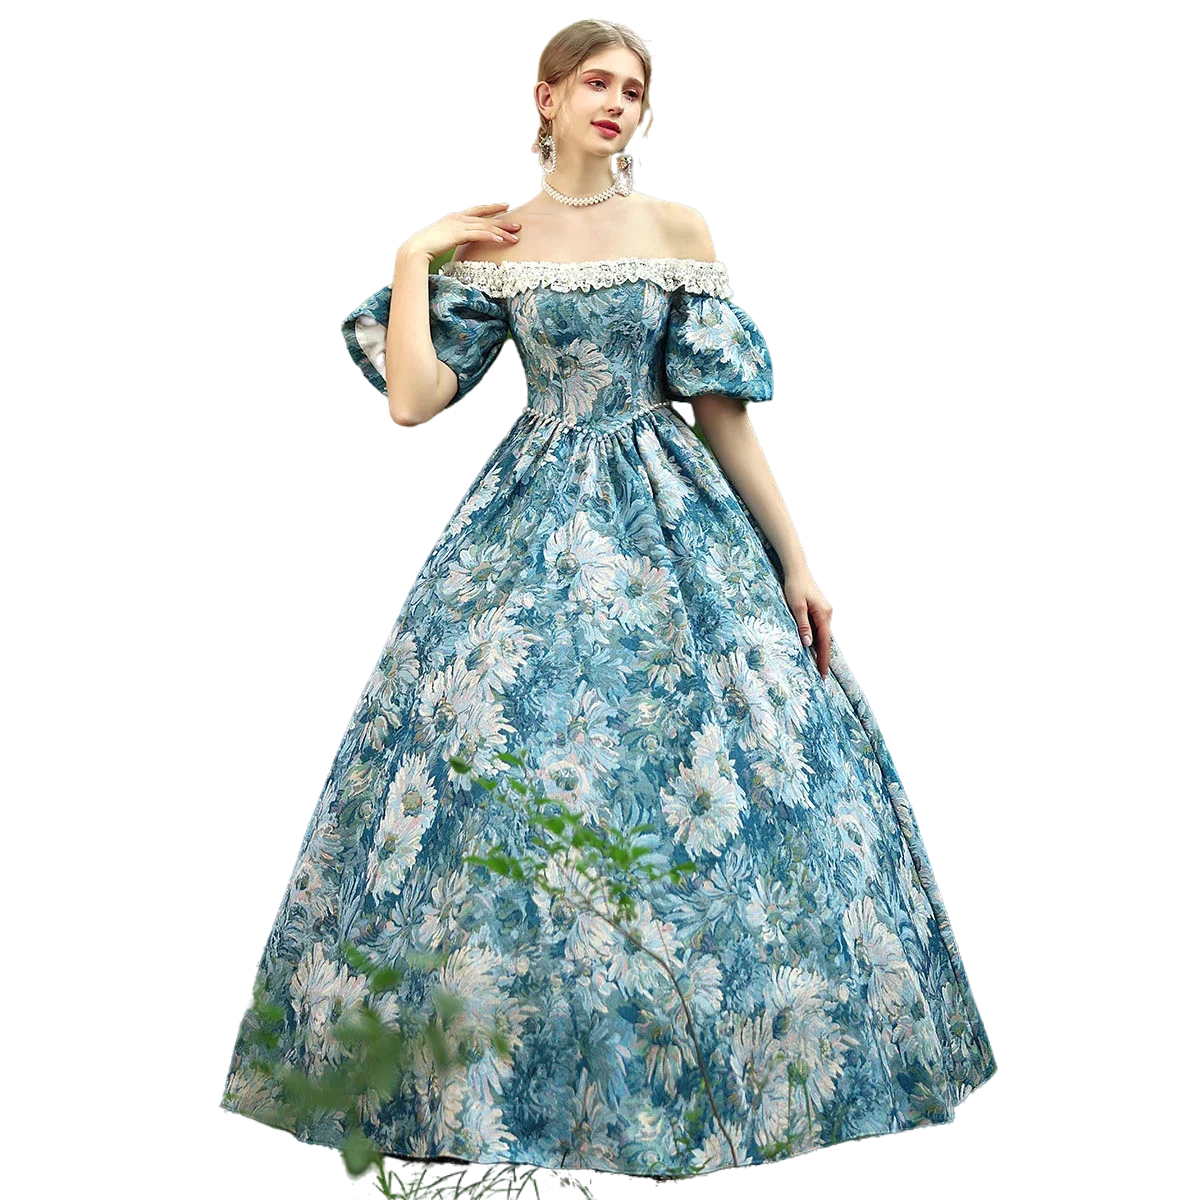 

KEMAO High-end Court Rococo Baroque Marie Antoinette Ball Gown 18th Century Renaissance Historical Period Victorian Dresses